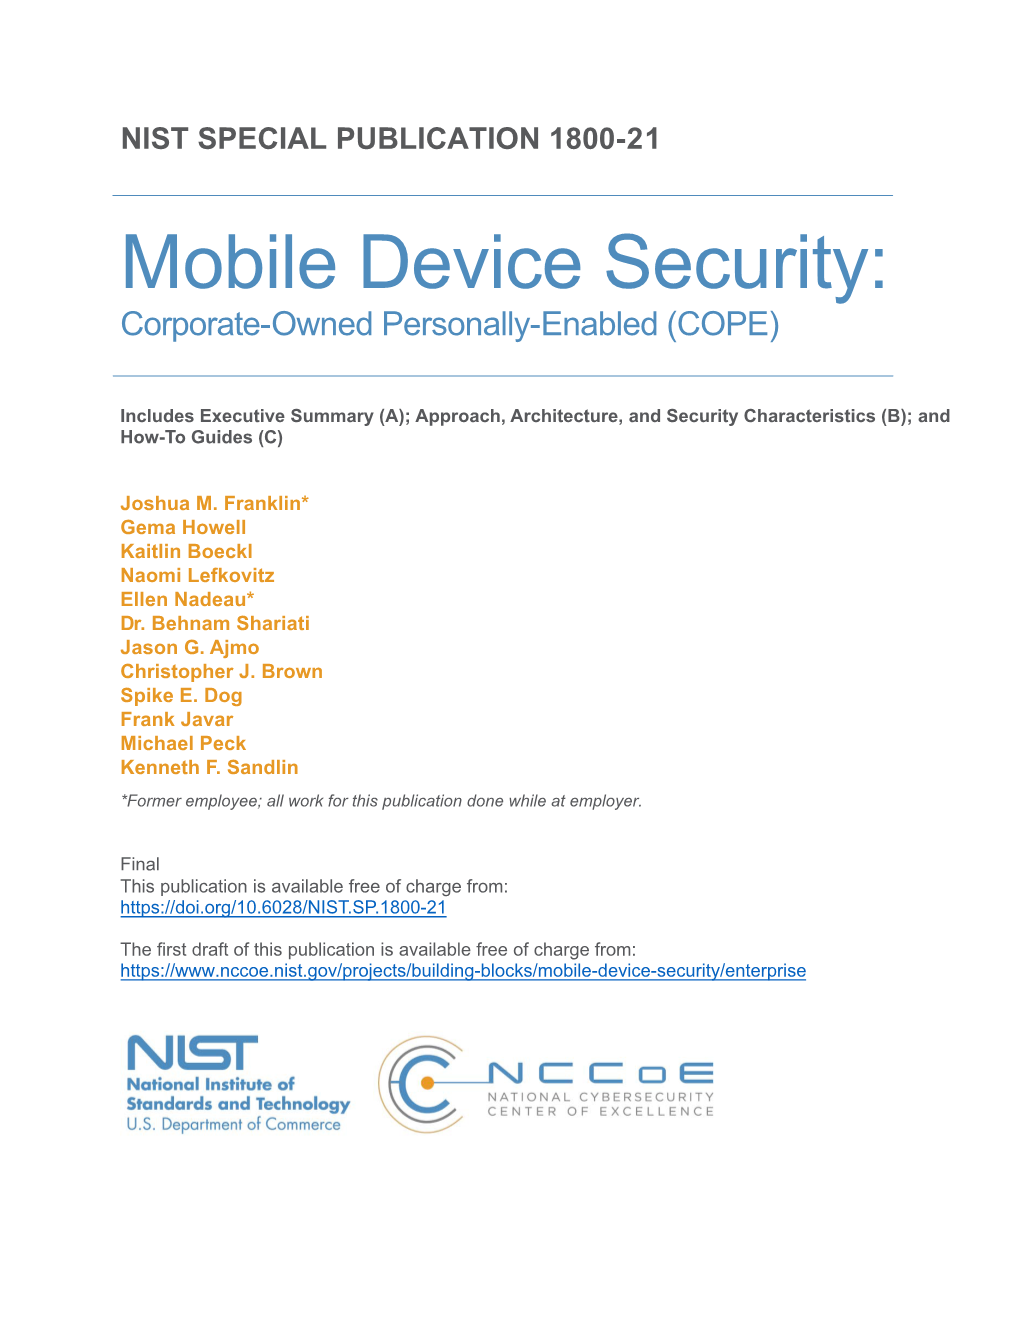 Mobile Device Security: Corporate-Owned Personally-Enabled (COPE)